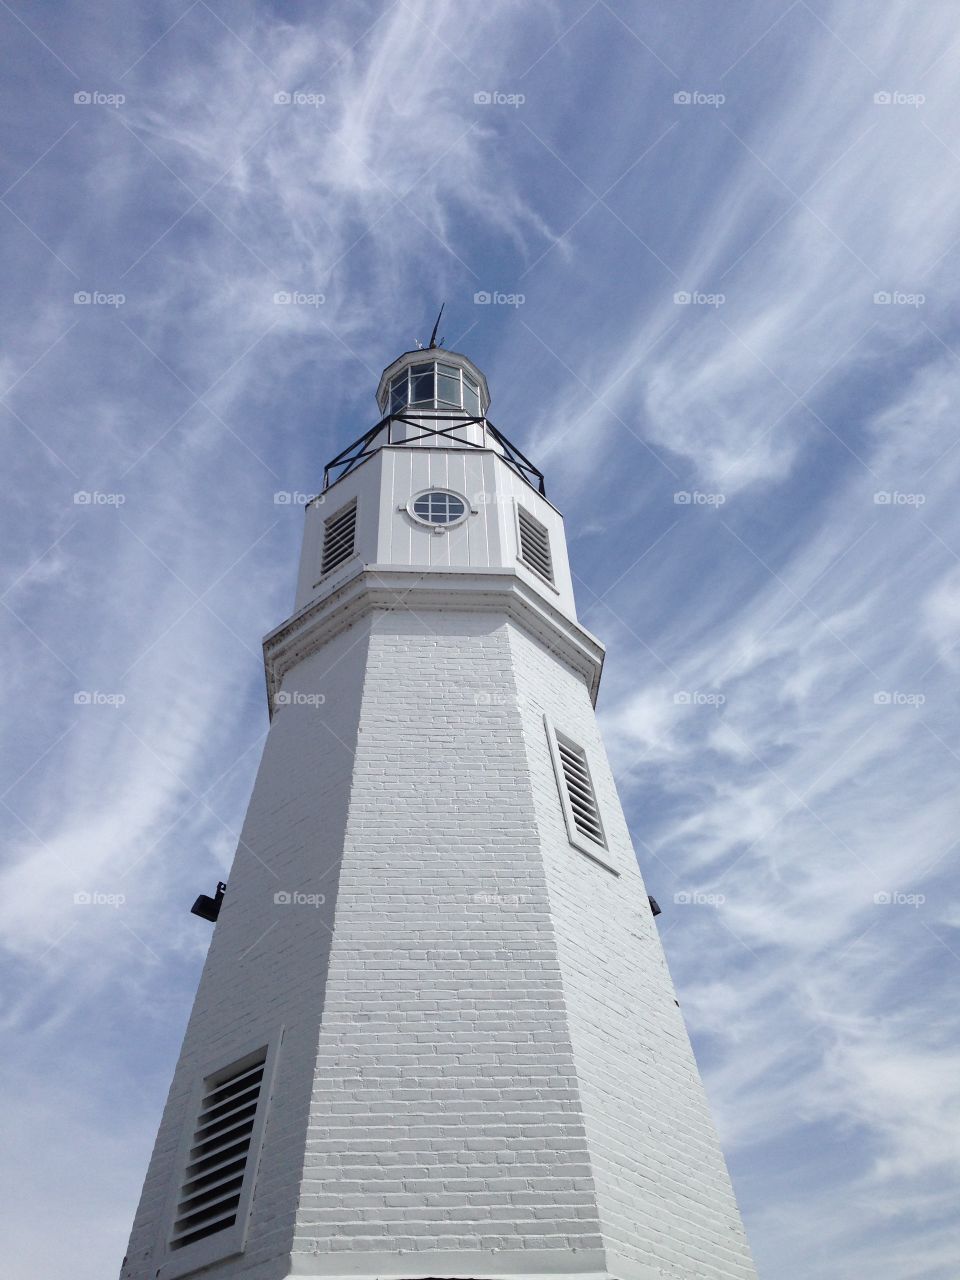 This towering lighthouse is anything but quaint as it summons lost sailors in the rocky seas.